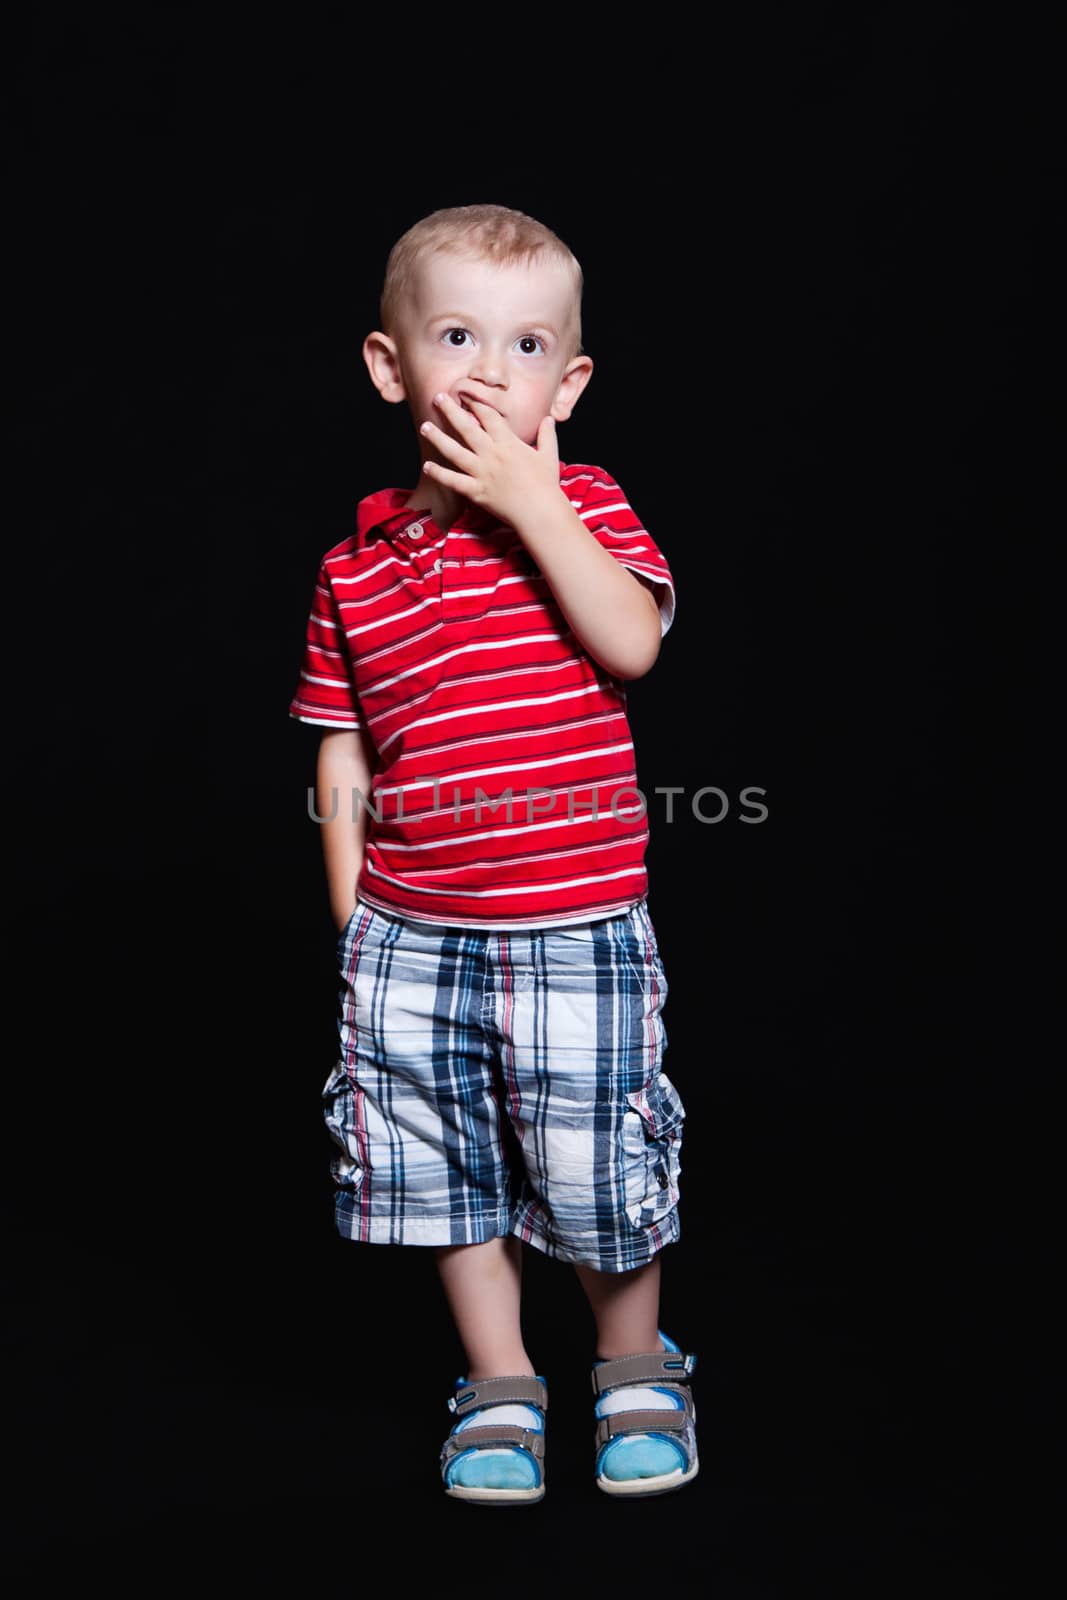 Little boy in a striped shirt and checkered shorts standing with hand in his pocket and hand in mouth